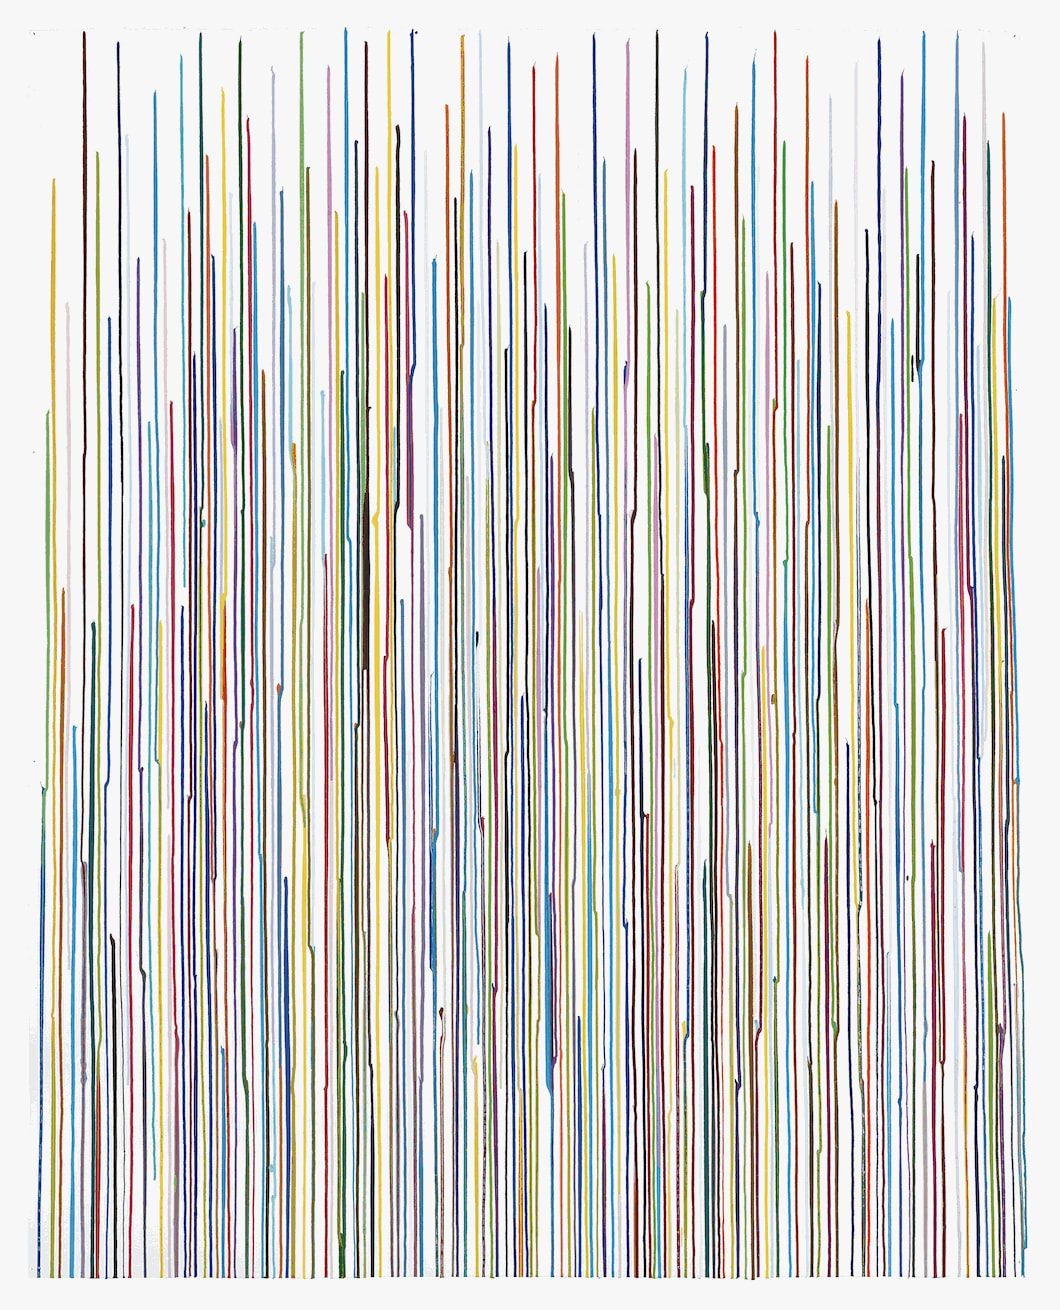 Staggered Lines: Mode, 2012